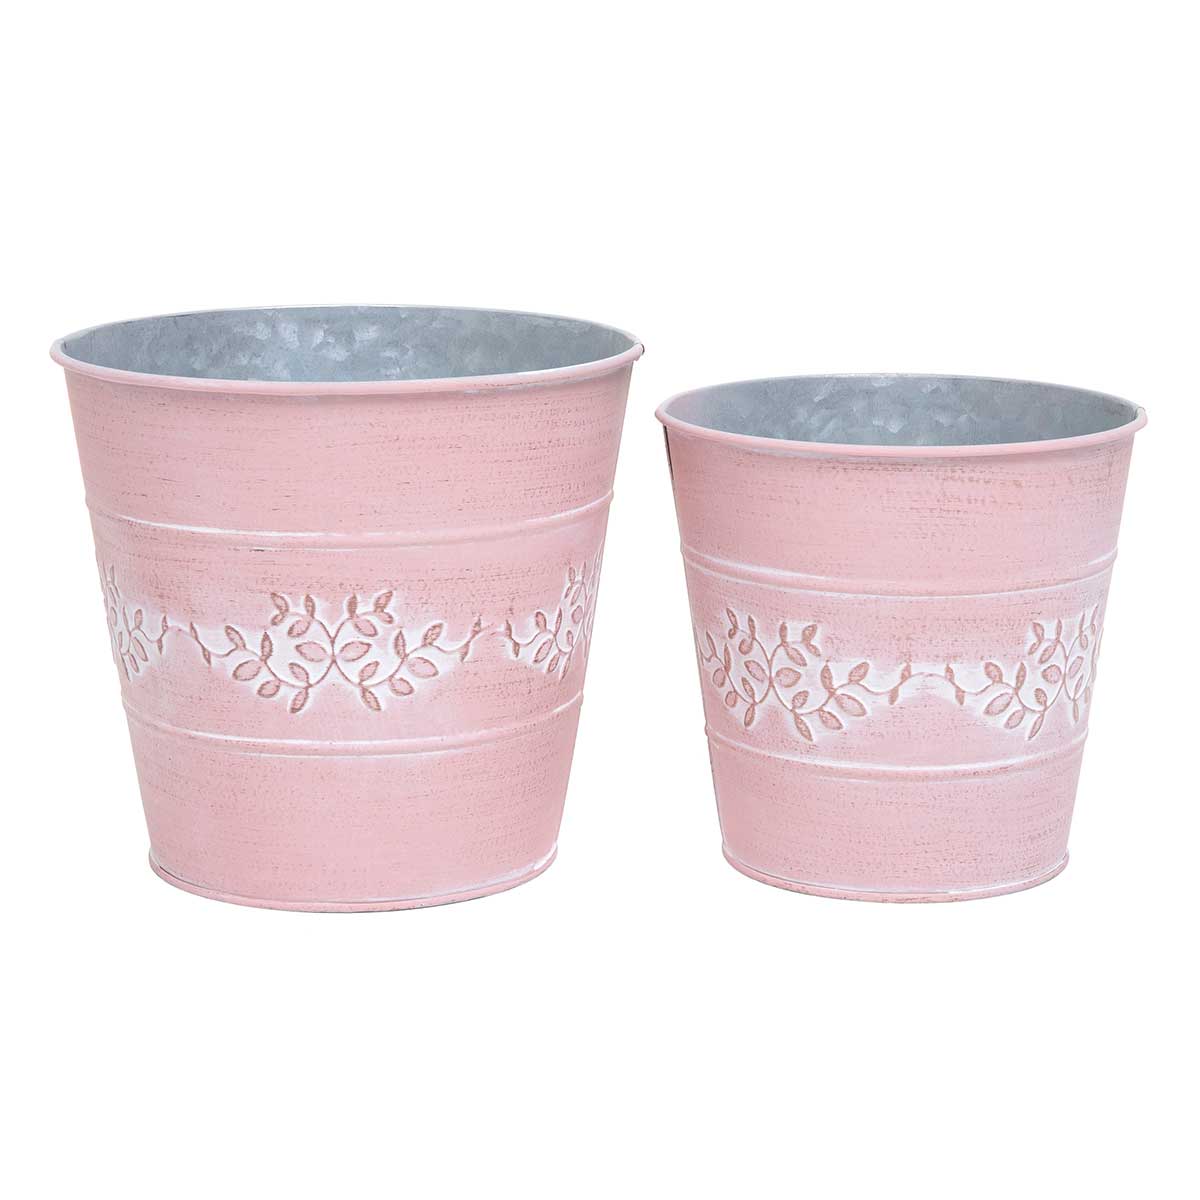 BUCKET PRIVET PINK LARGE 7.25IN X 6.5IN METAL - Click Image to Close